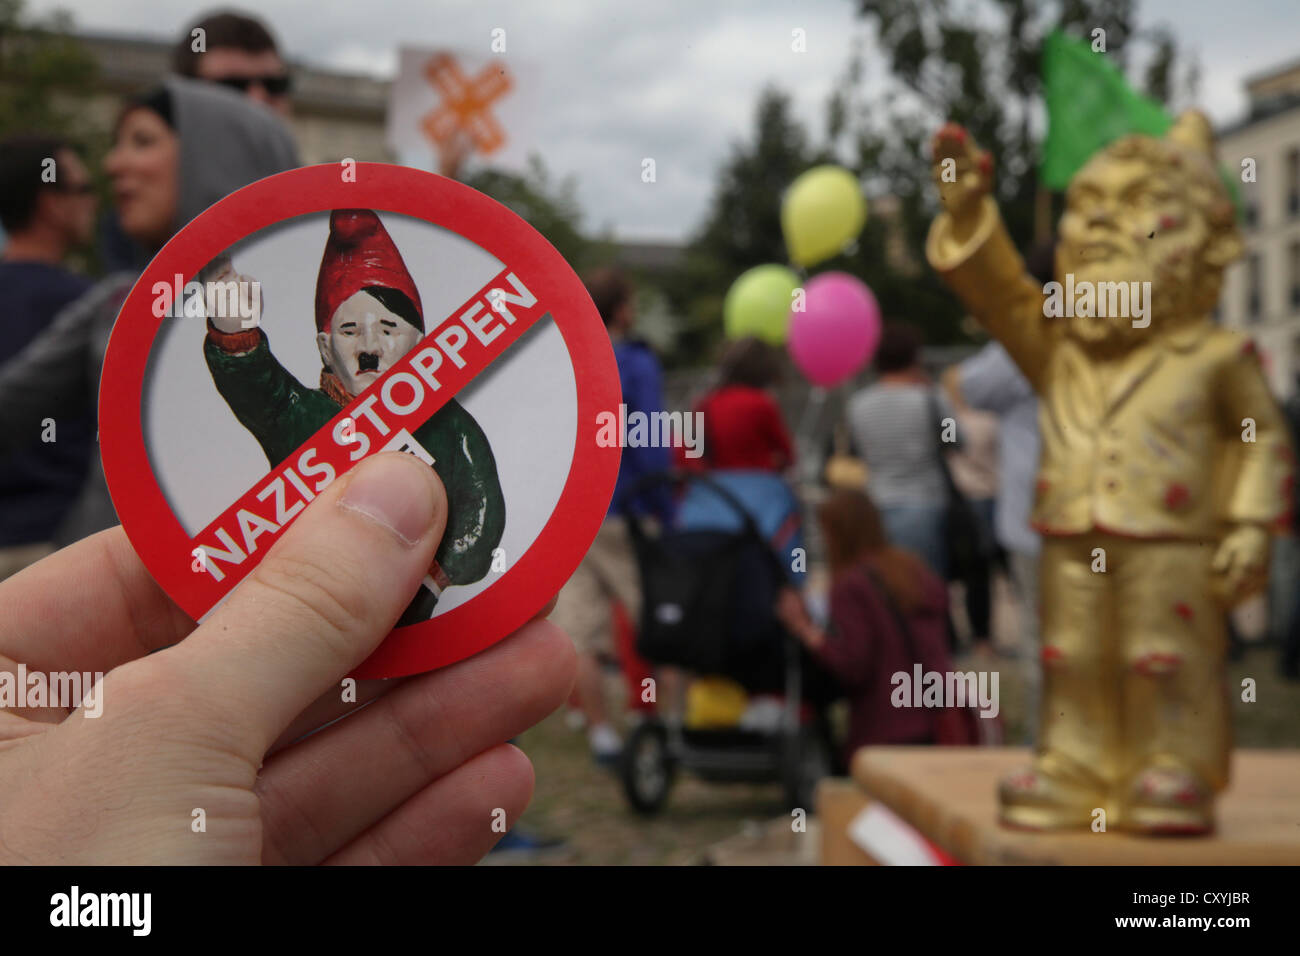 Garden gnome campaign against Nazis, organised by the SPD youth organisation Jusos, young socialists, protest against a rally by Stock Photo